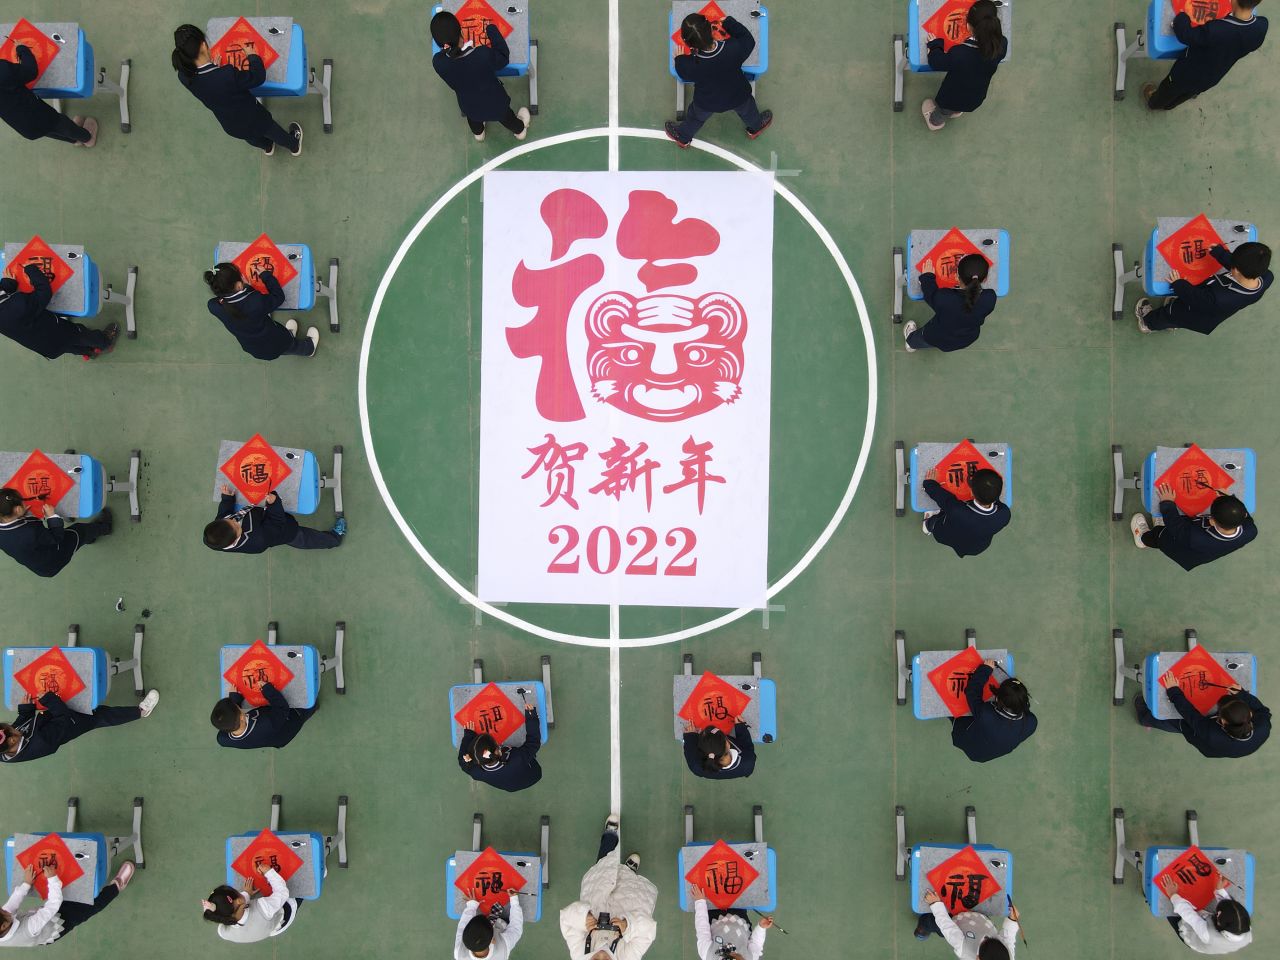 Primary school students in Hefei, China, celebrate the new year by writing the character "fu," which means "good luck."